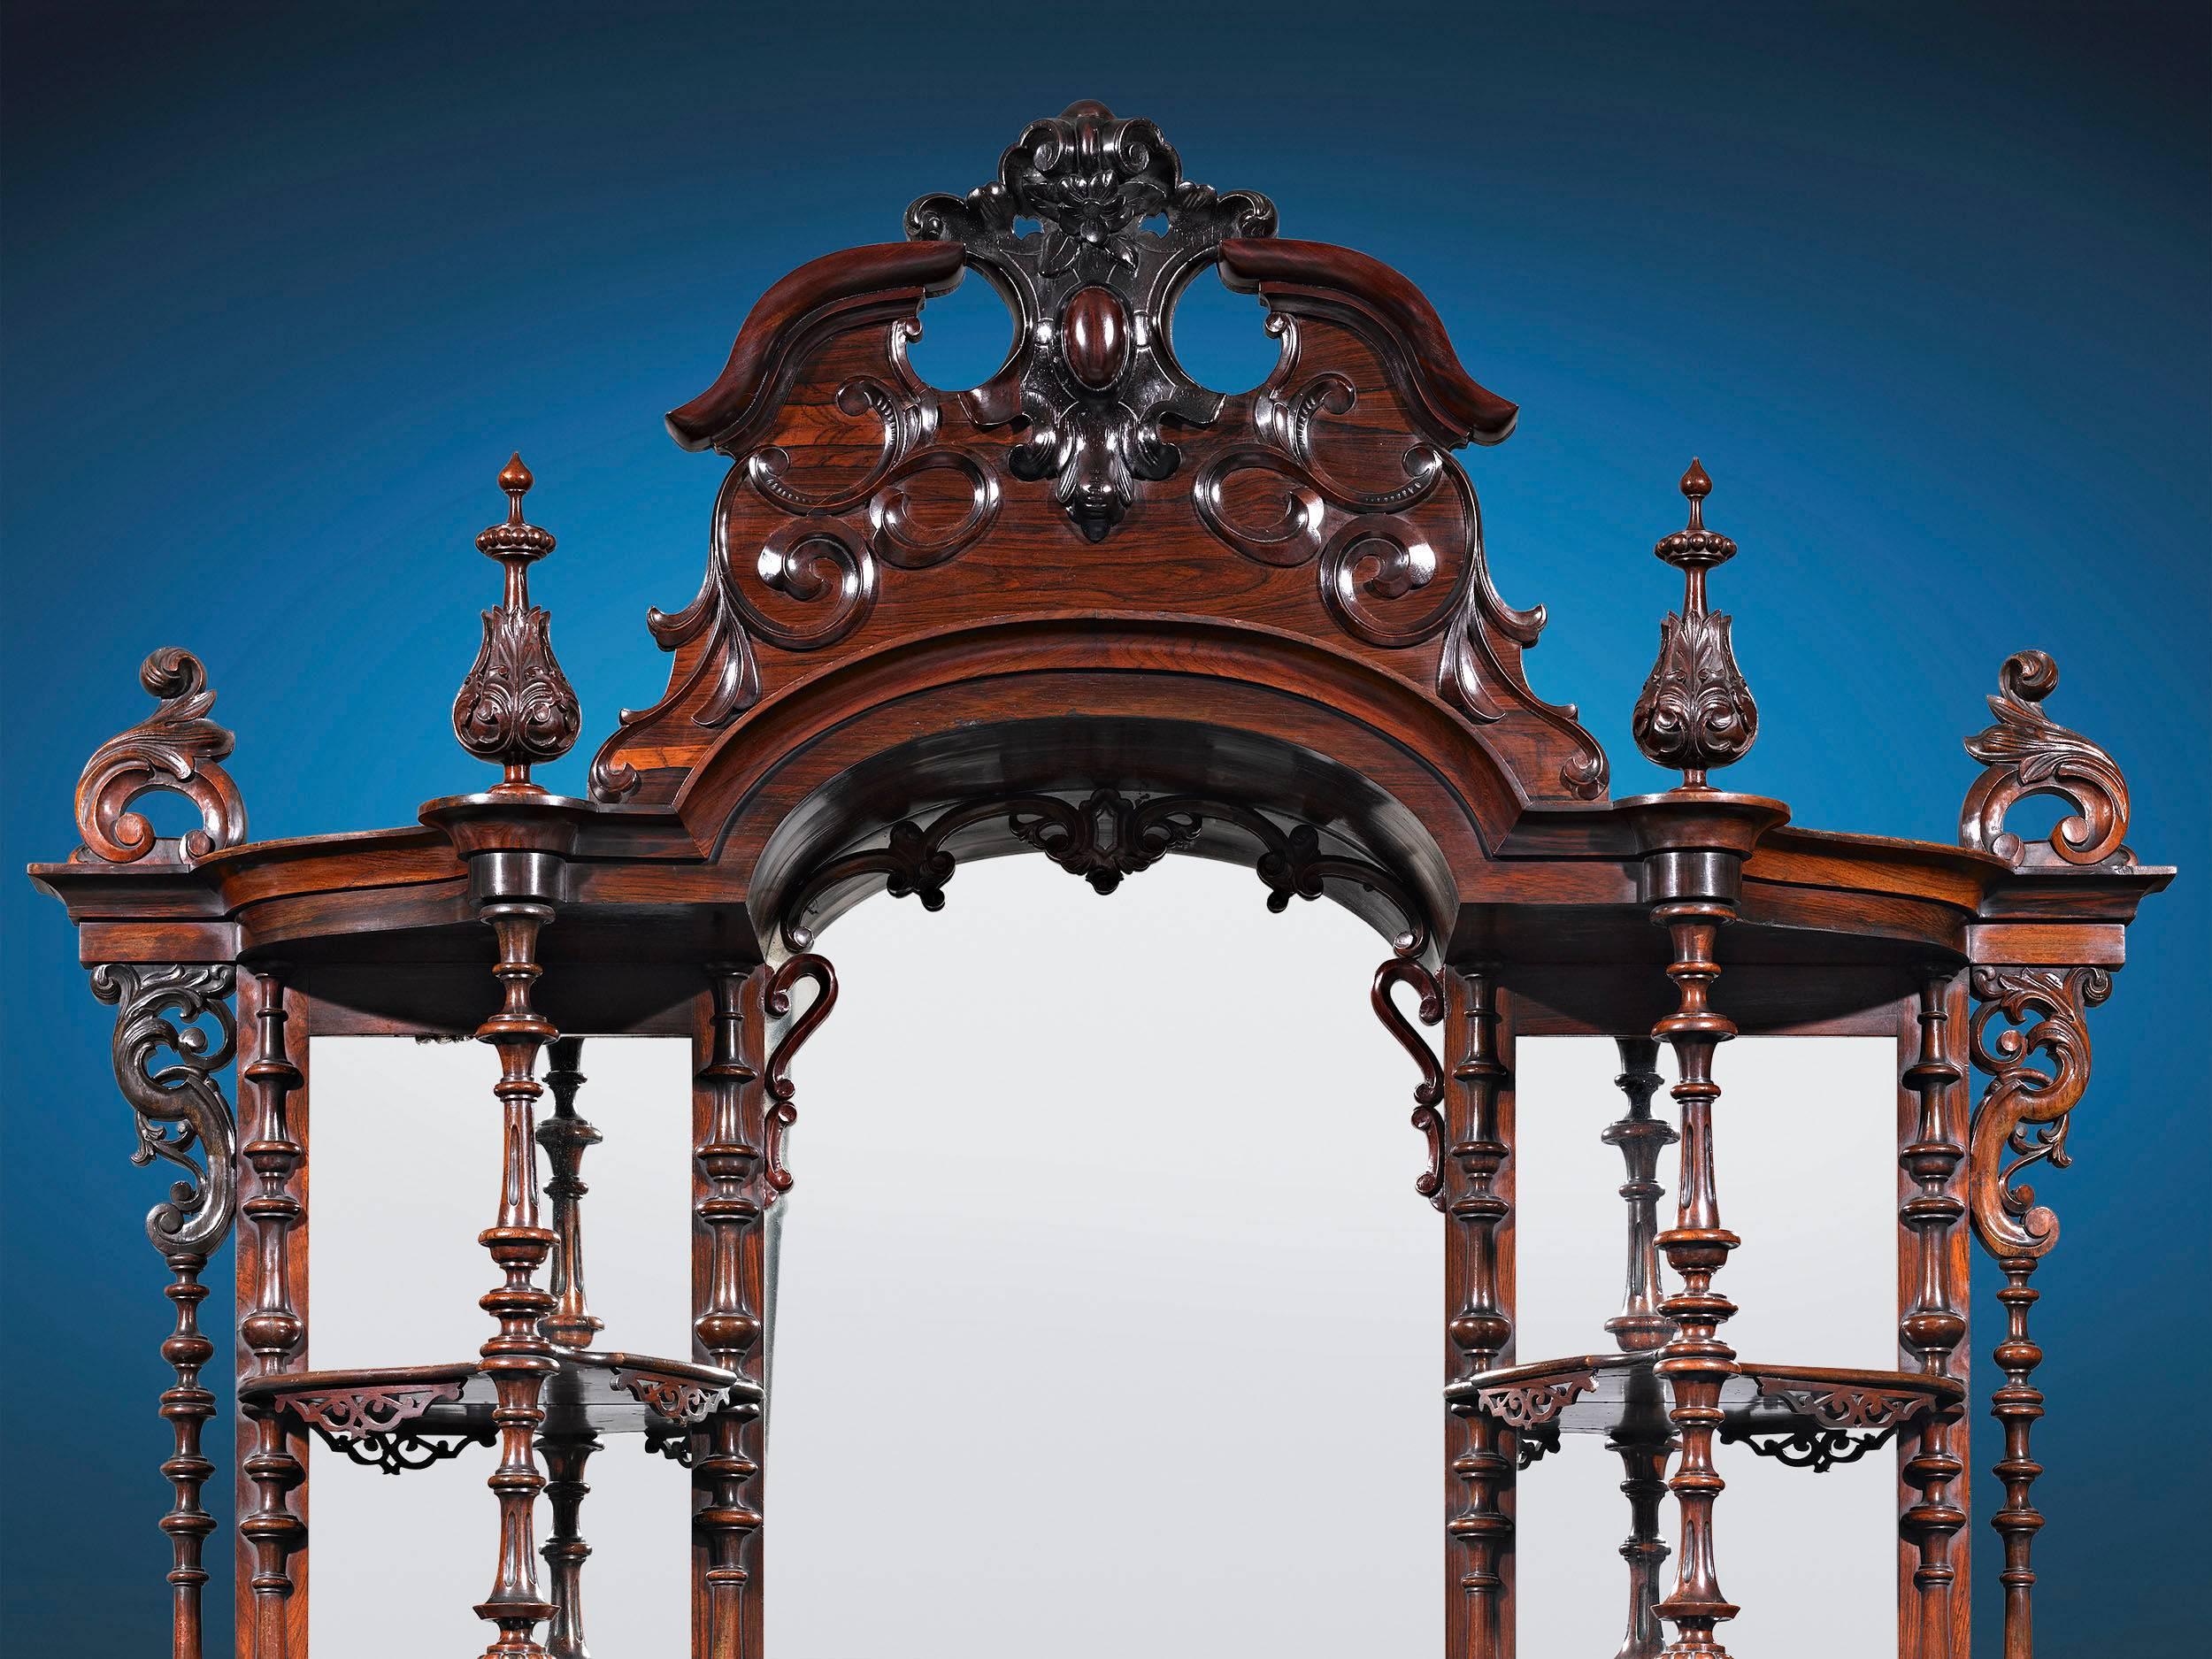 This monumental, museum-quality American Rococo Revival étagère was crafted by the renowned Brooklyn-based cabinetmaker Thomas Brooks. Beautifully designed and executed in rosewood, the extraordinary piece is set apart by its profusion of